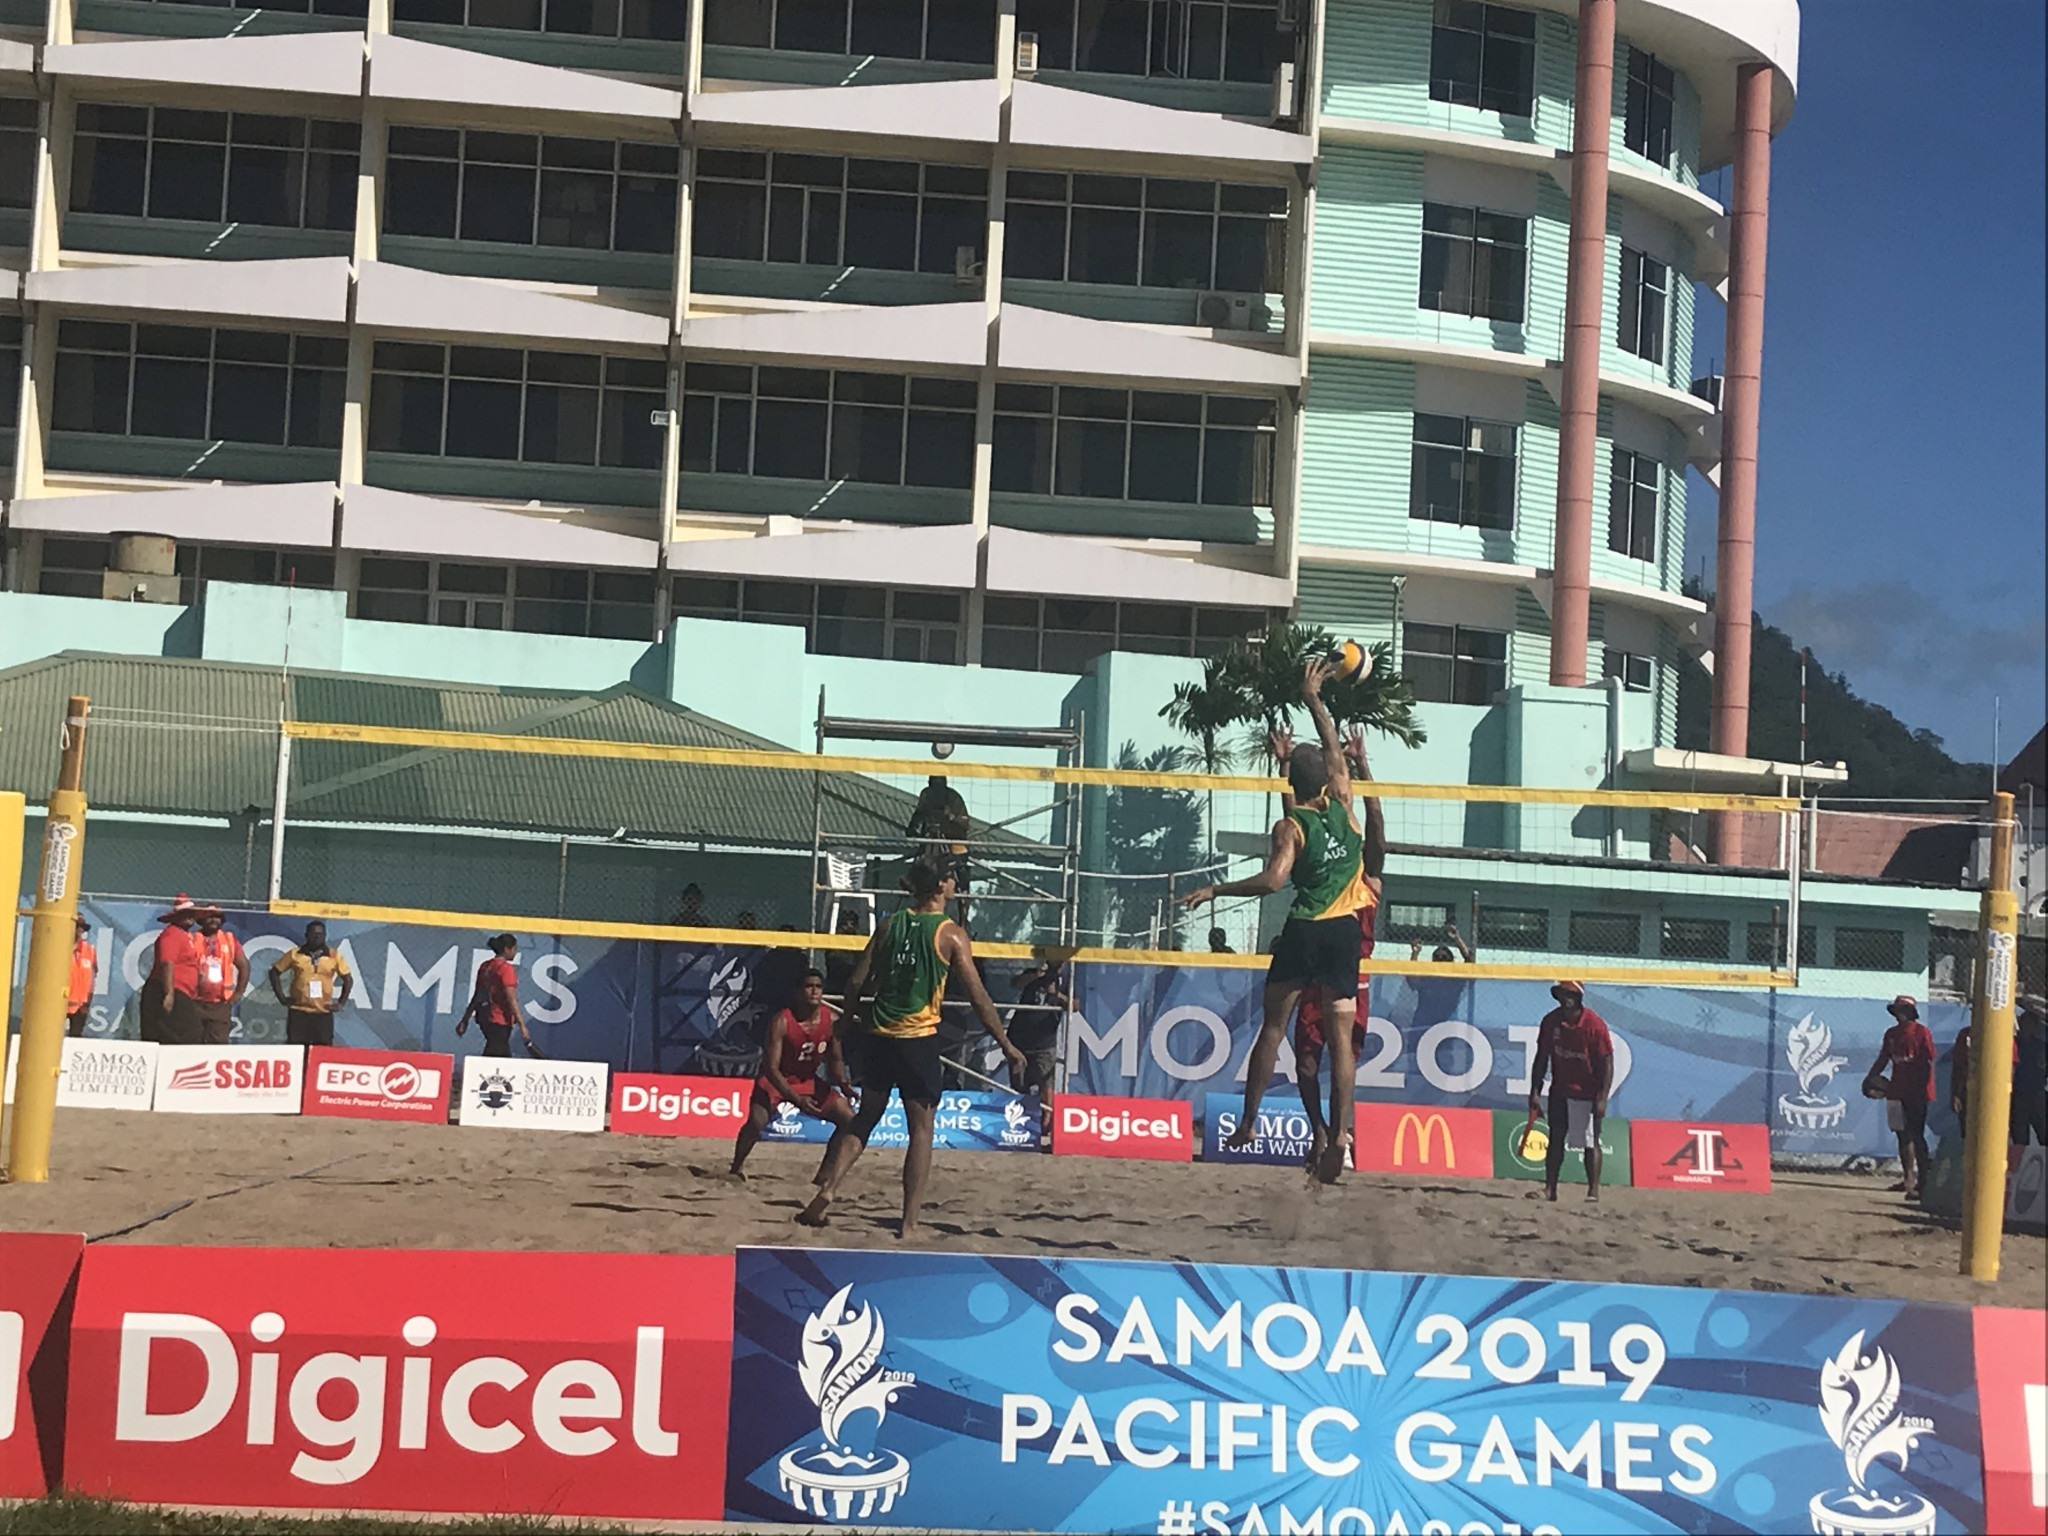 Australia claimed victory in the men’s beach volleyball at the 2019 Pacific Games ©Matthew Smith